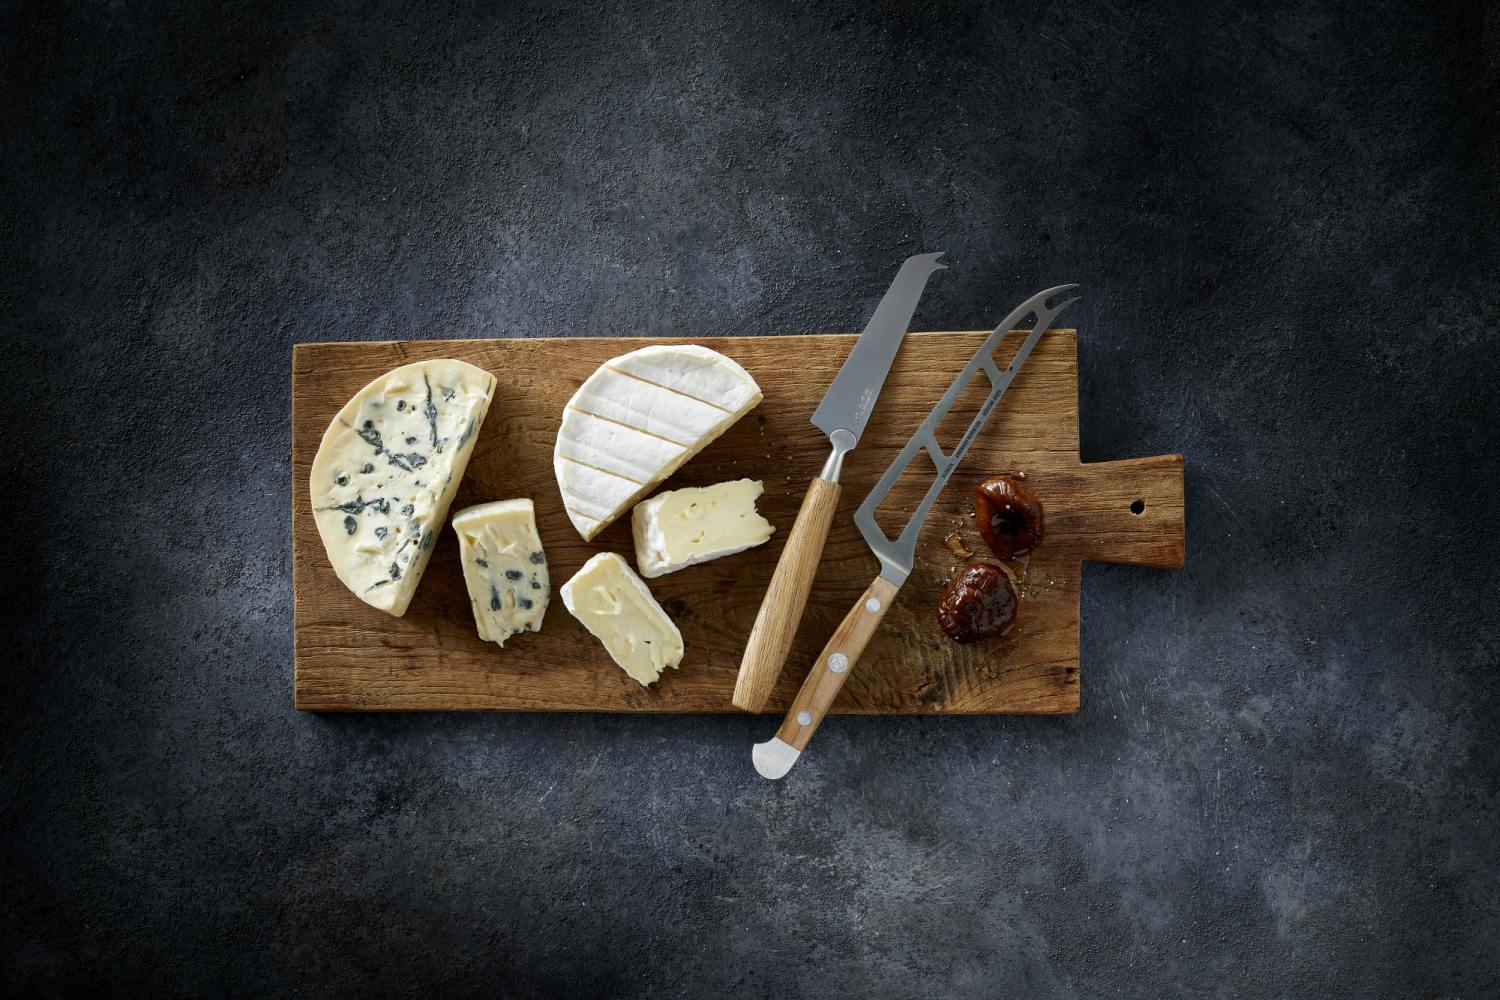 https://cdn.castellocheese.com/globalassets/world-of-cheese/editorial-content/cheese-knife-guide-mould-cheese.jpg